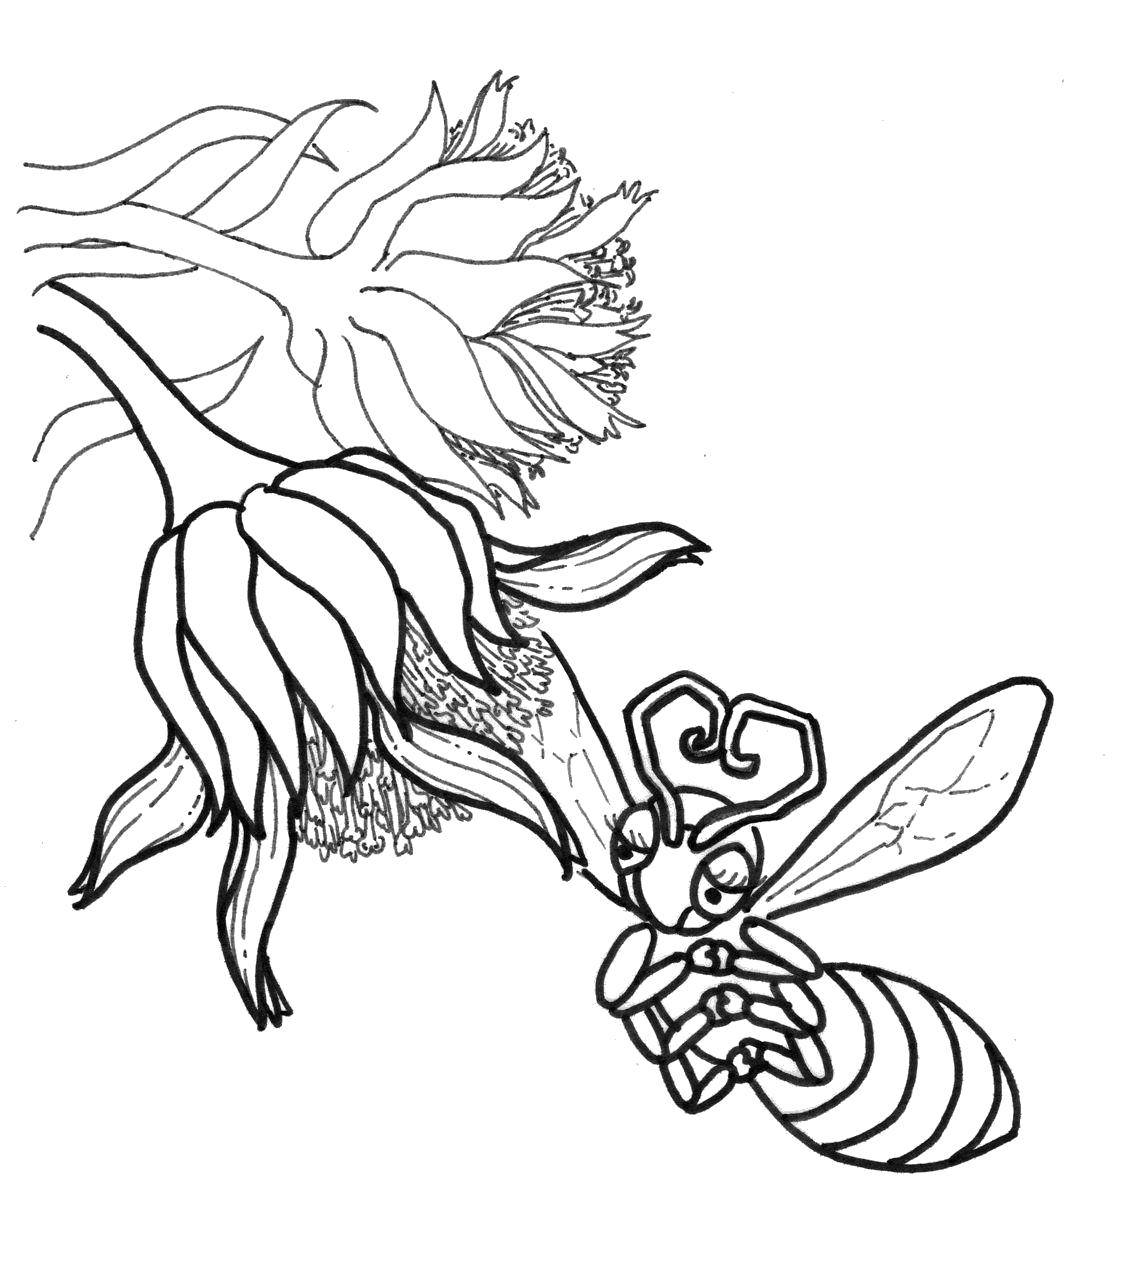 Coloring Bee honey collects. Category Insects. Tags:  Insects, bee.